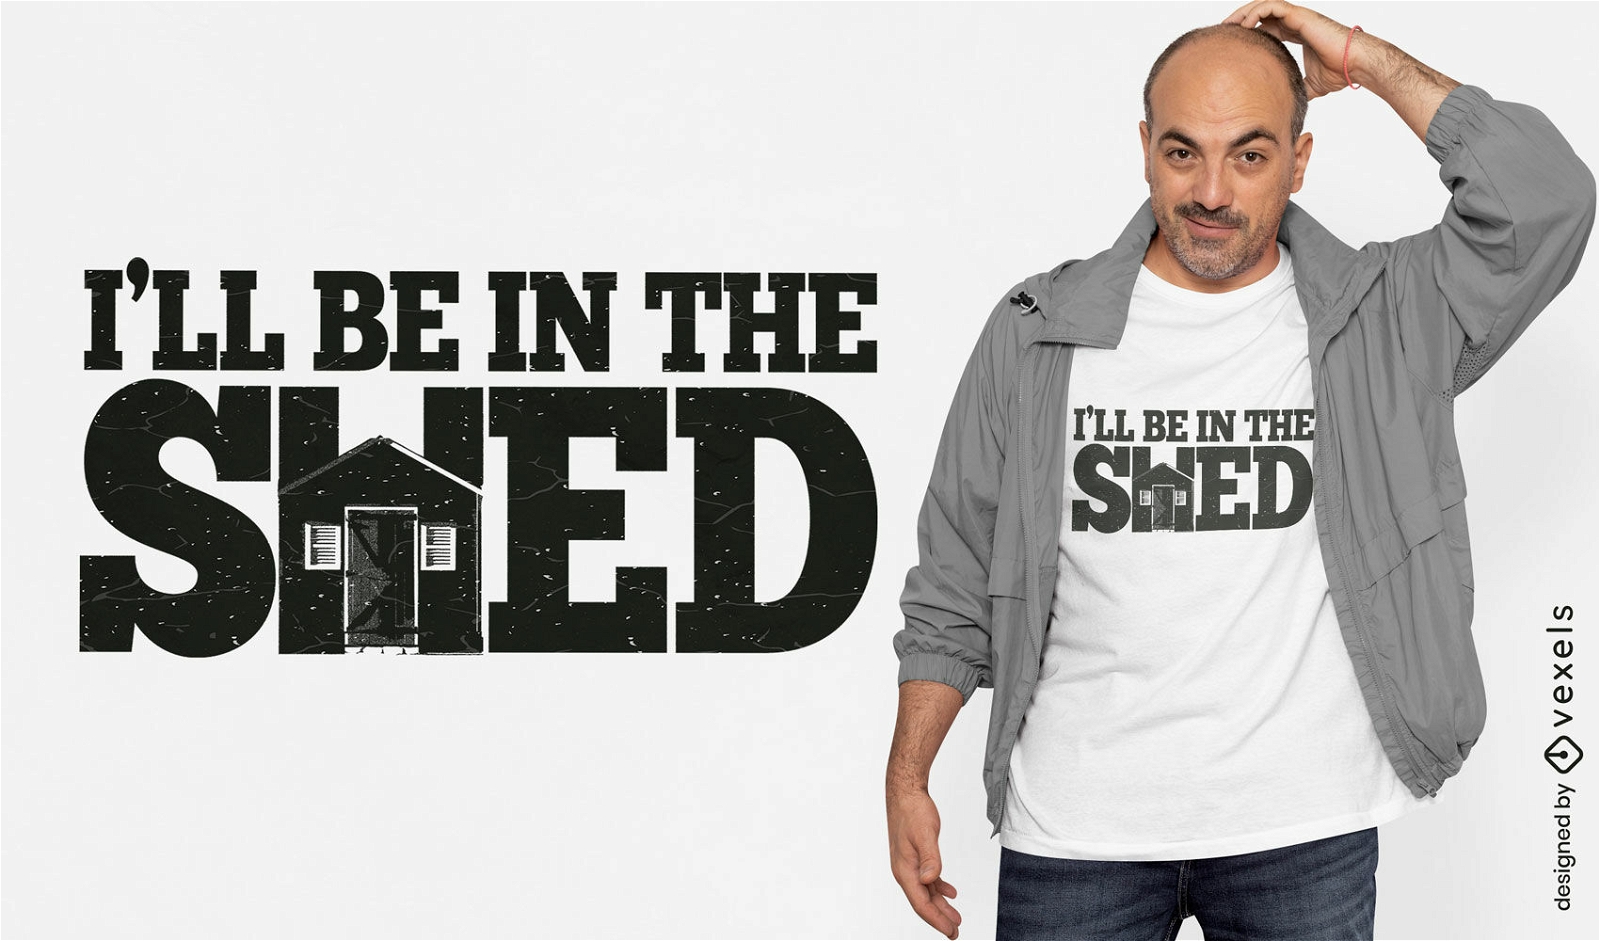 I'll be in the shed t-shirt design